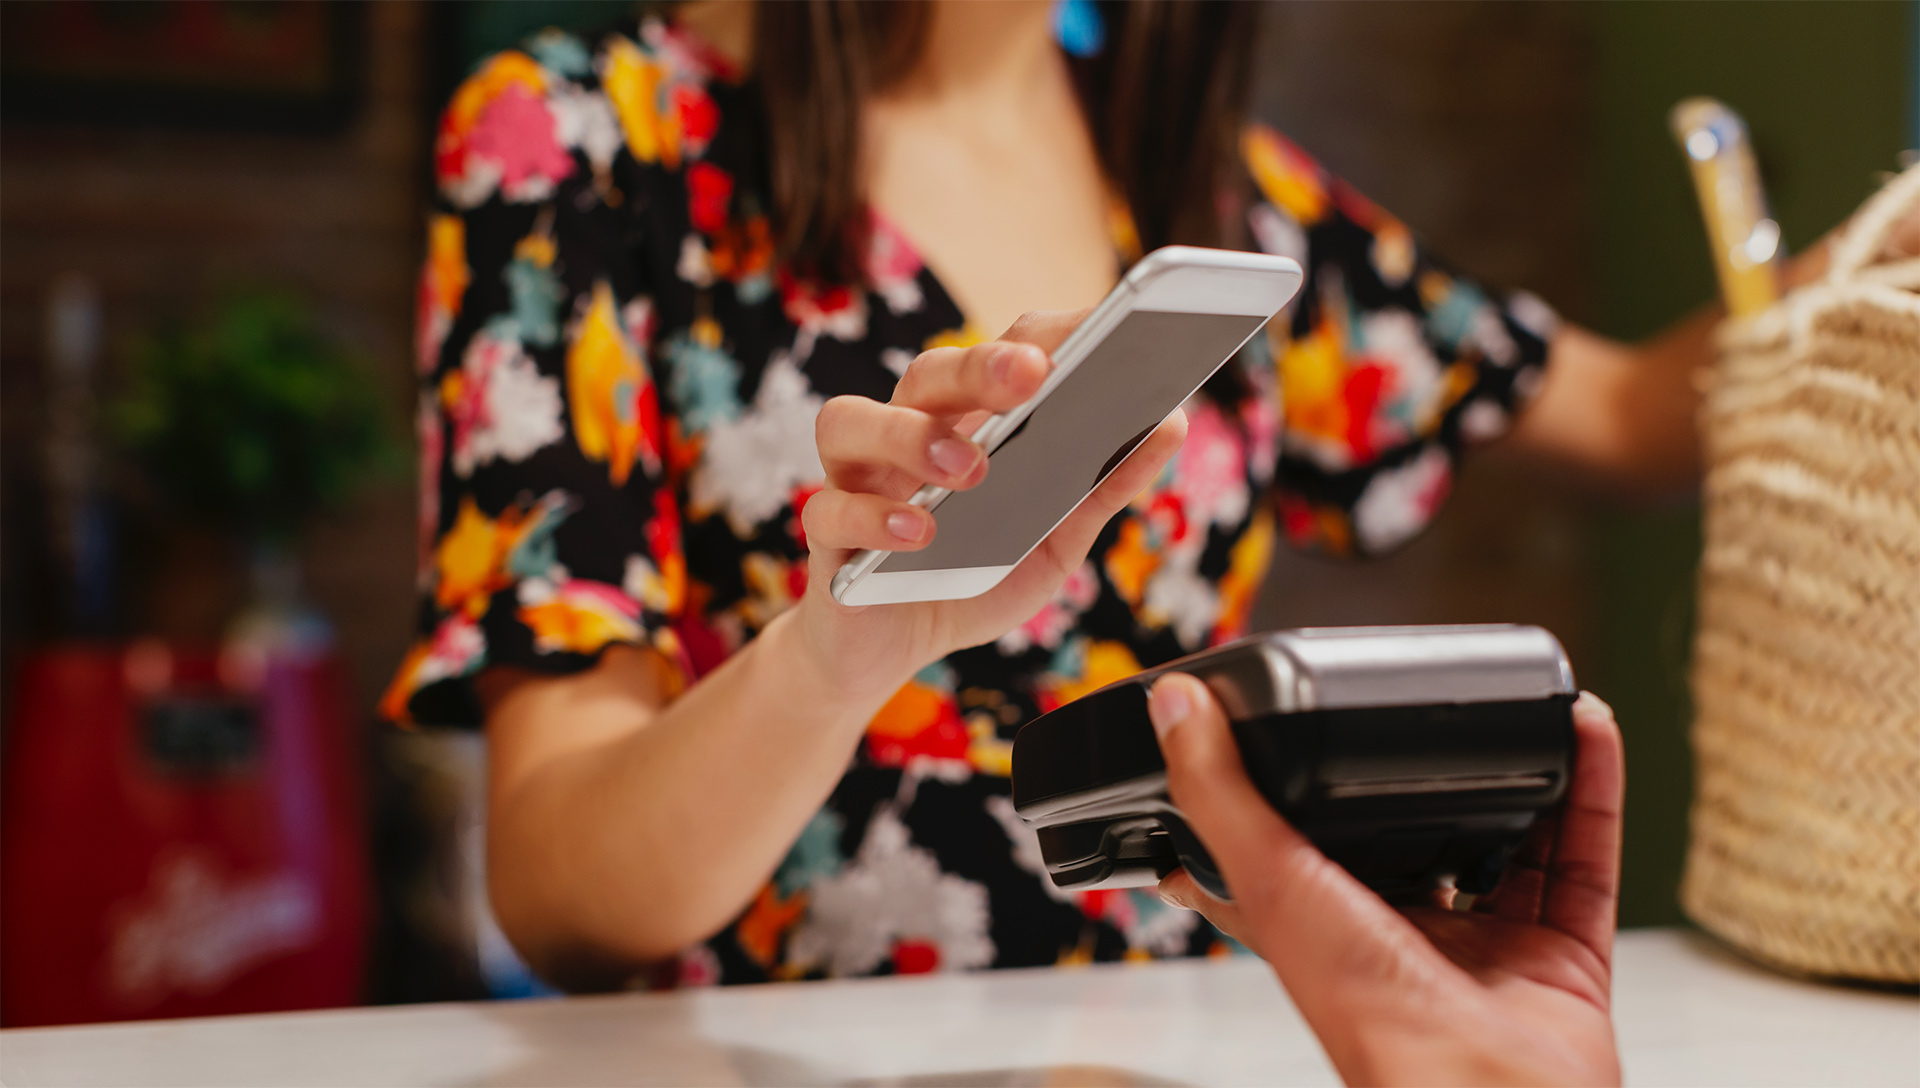 Using mobile payments